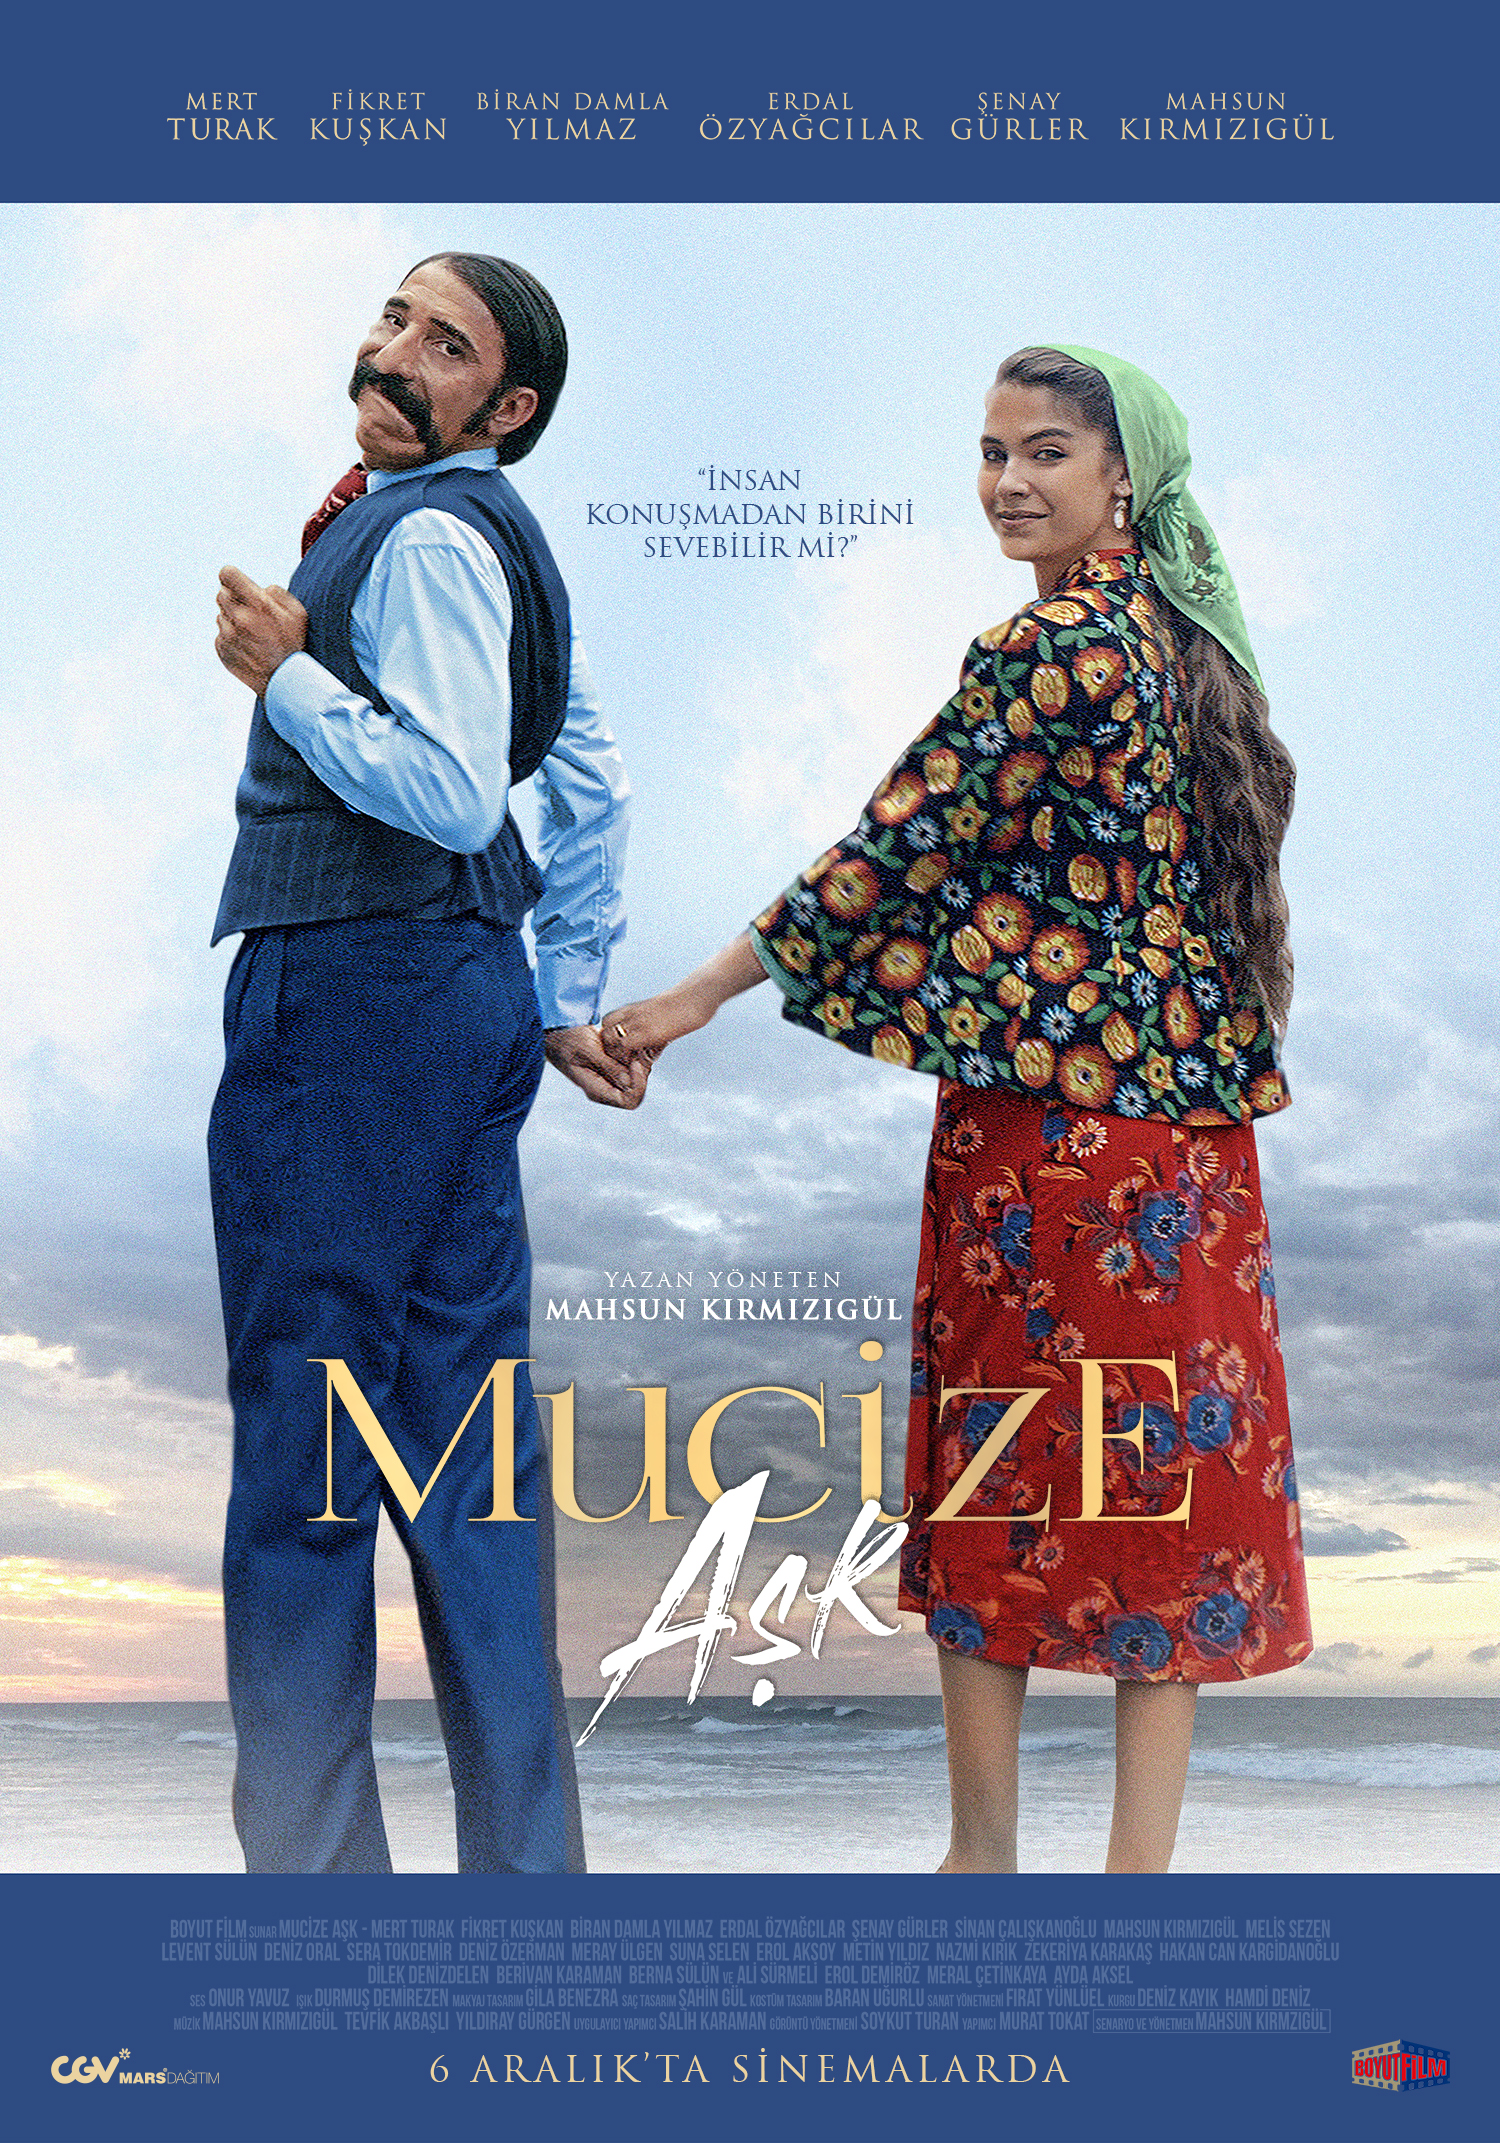 The Miracle 2: Love (2019) Main Poster